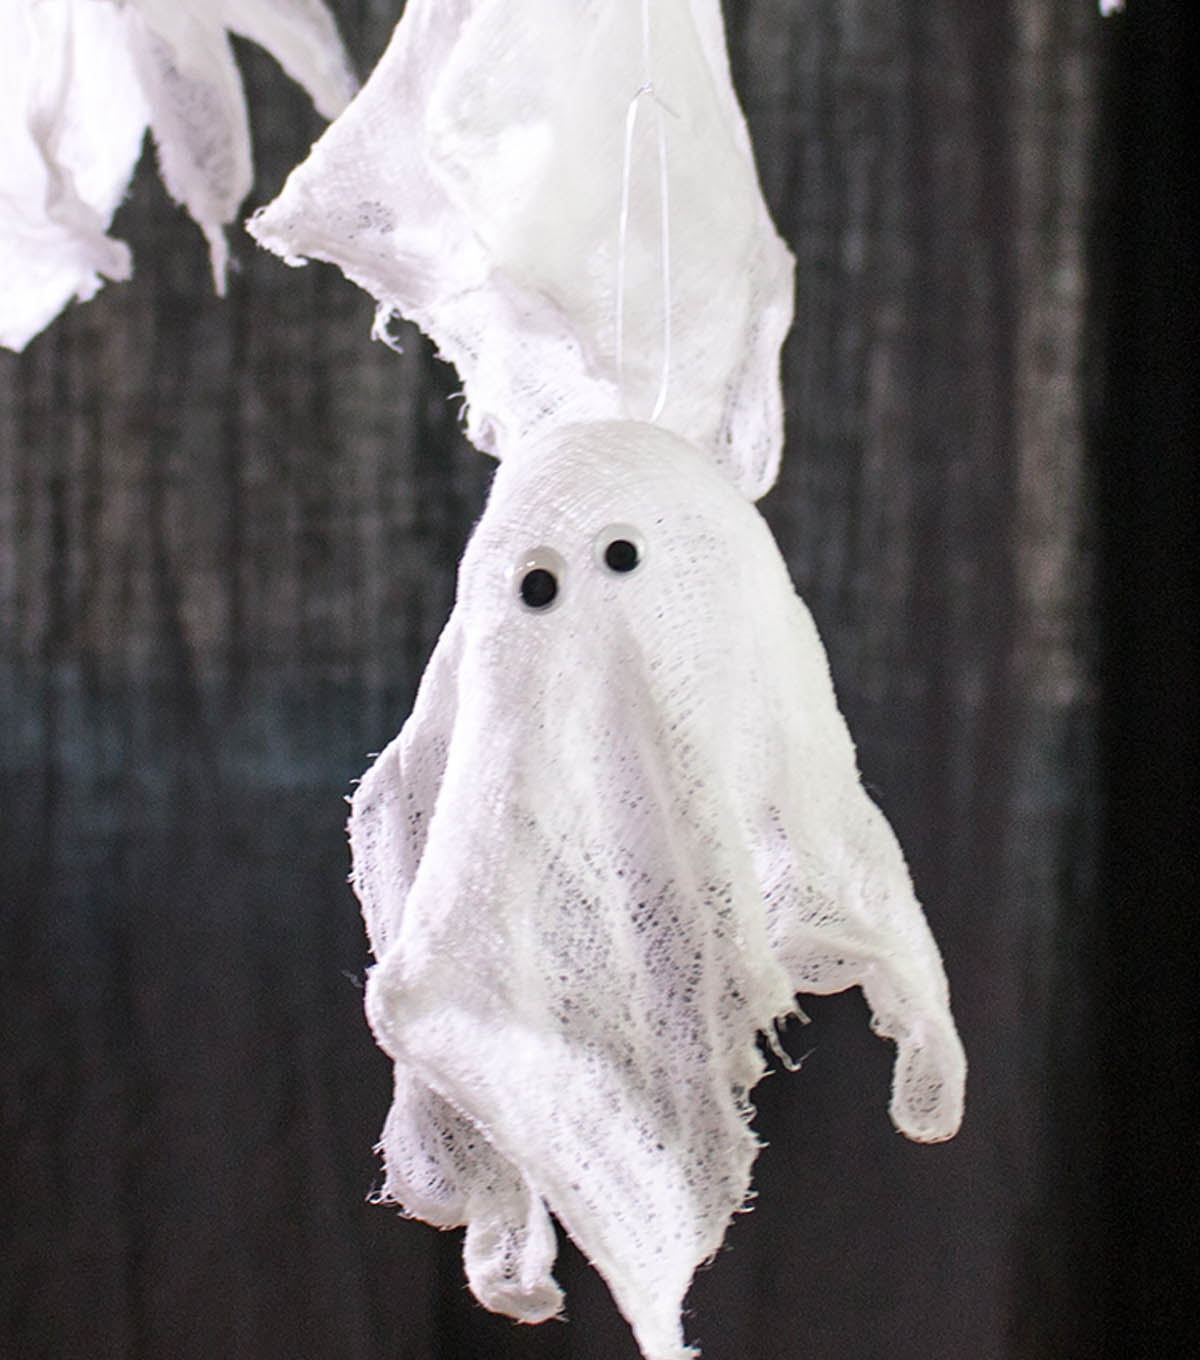 How to make Spooky Cheesecloth Ghosts | JOANN